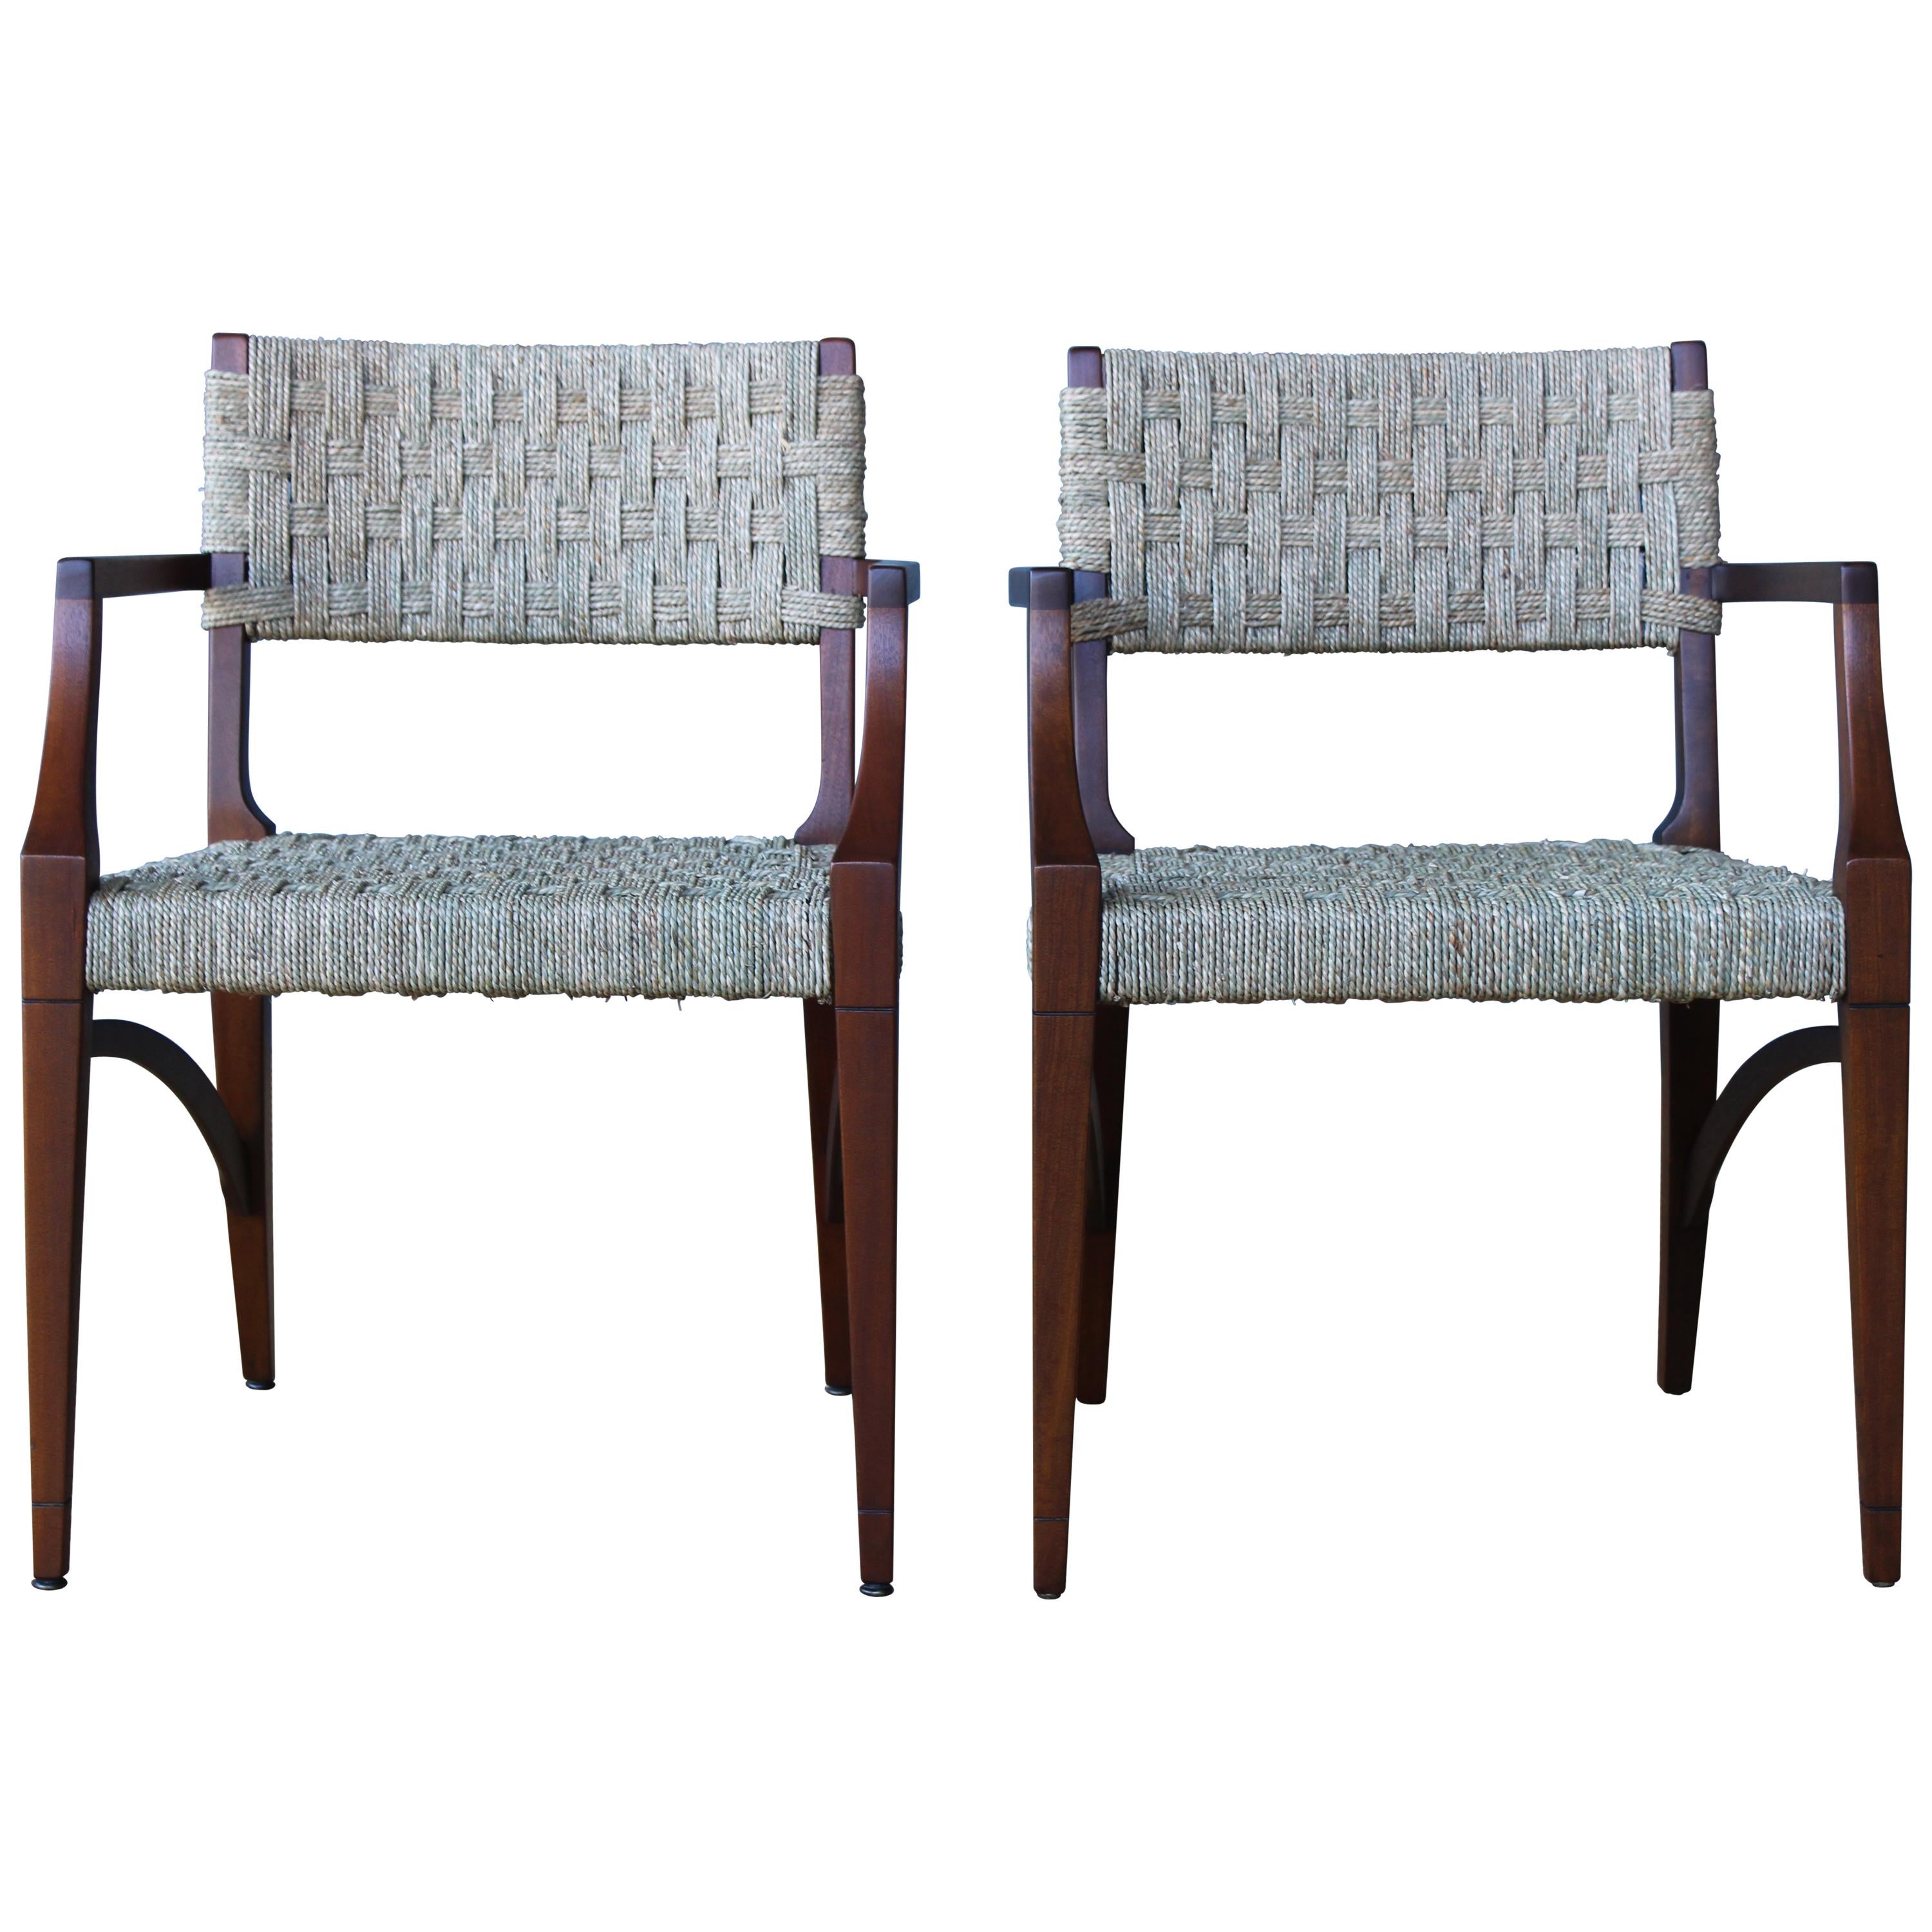 Pair of Sea Grass and Mahogany Armchairs, France, 1950s. 